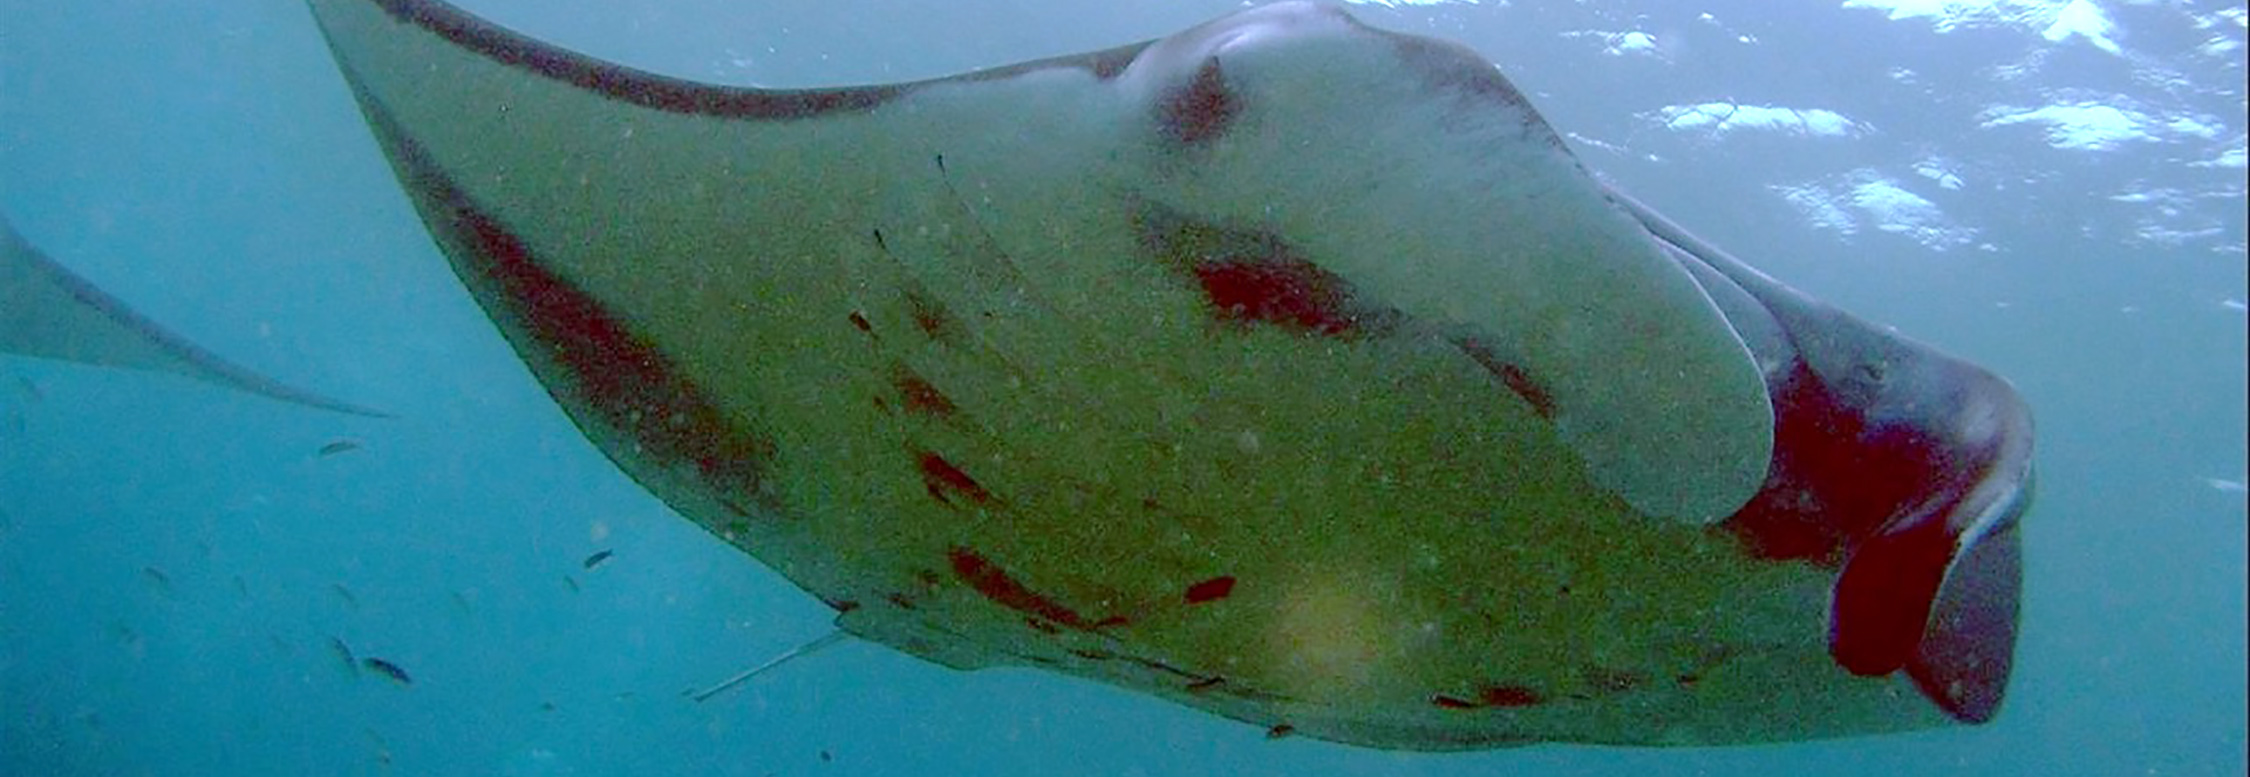 Manta Ray

By Richard Harvey - Own work, Public Domain, https://commons.wikimedia.org/w/index.php?curid=1005742

